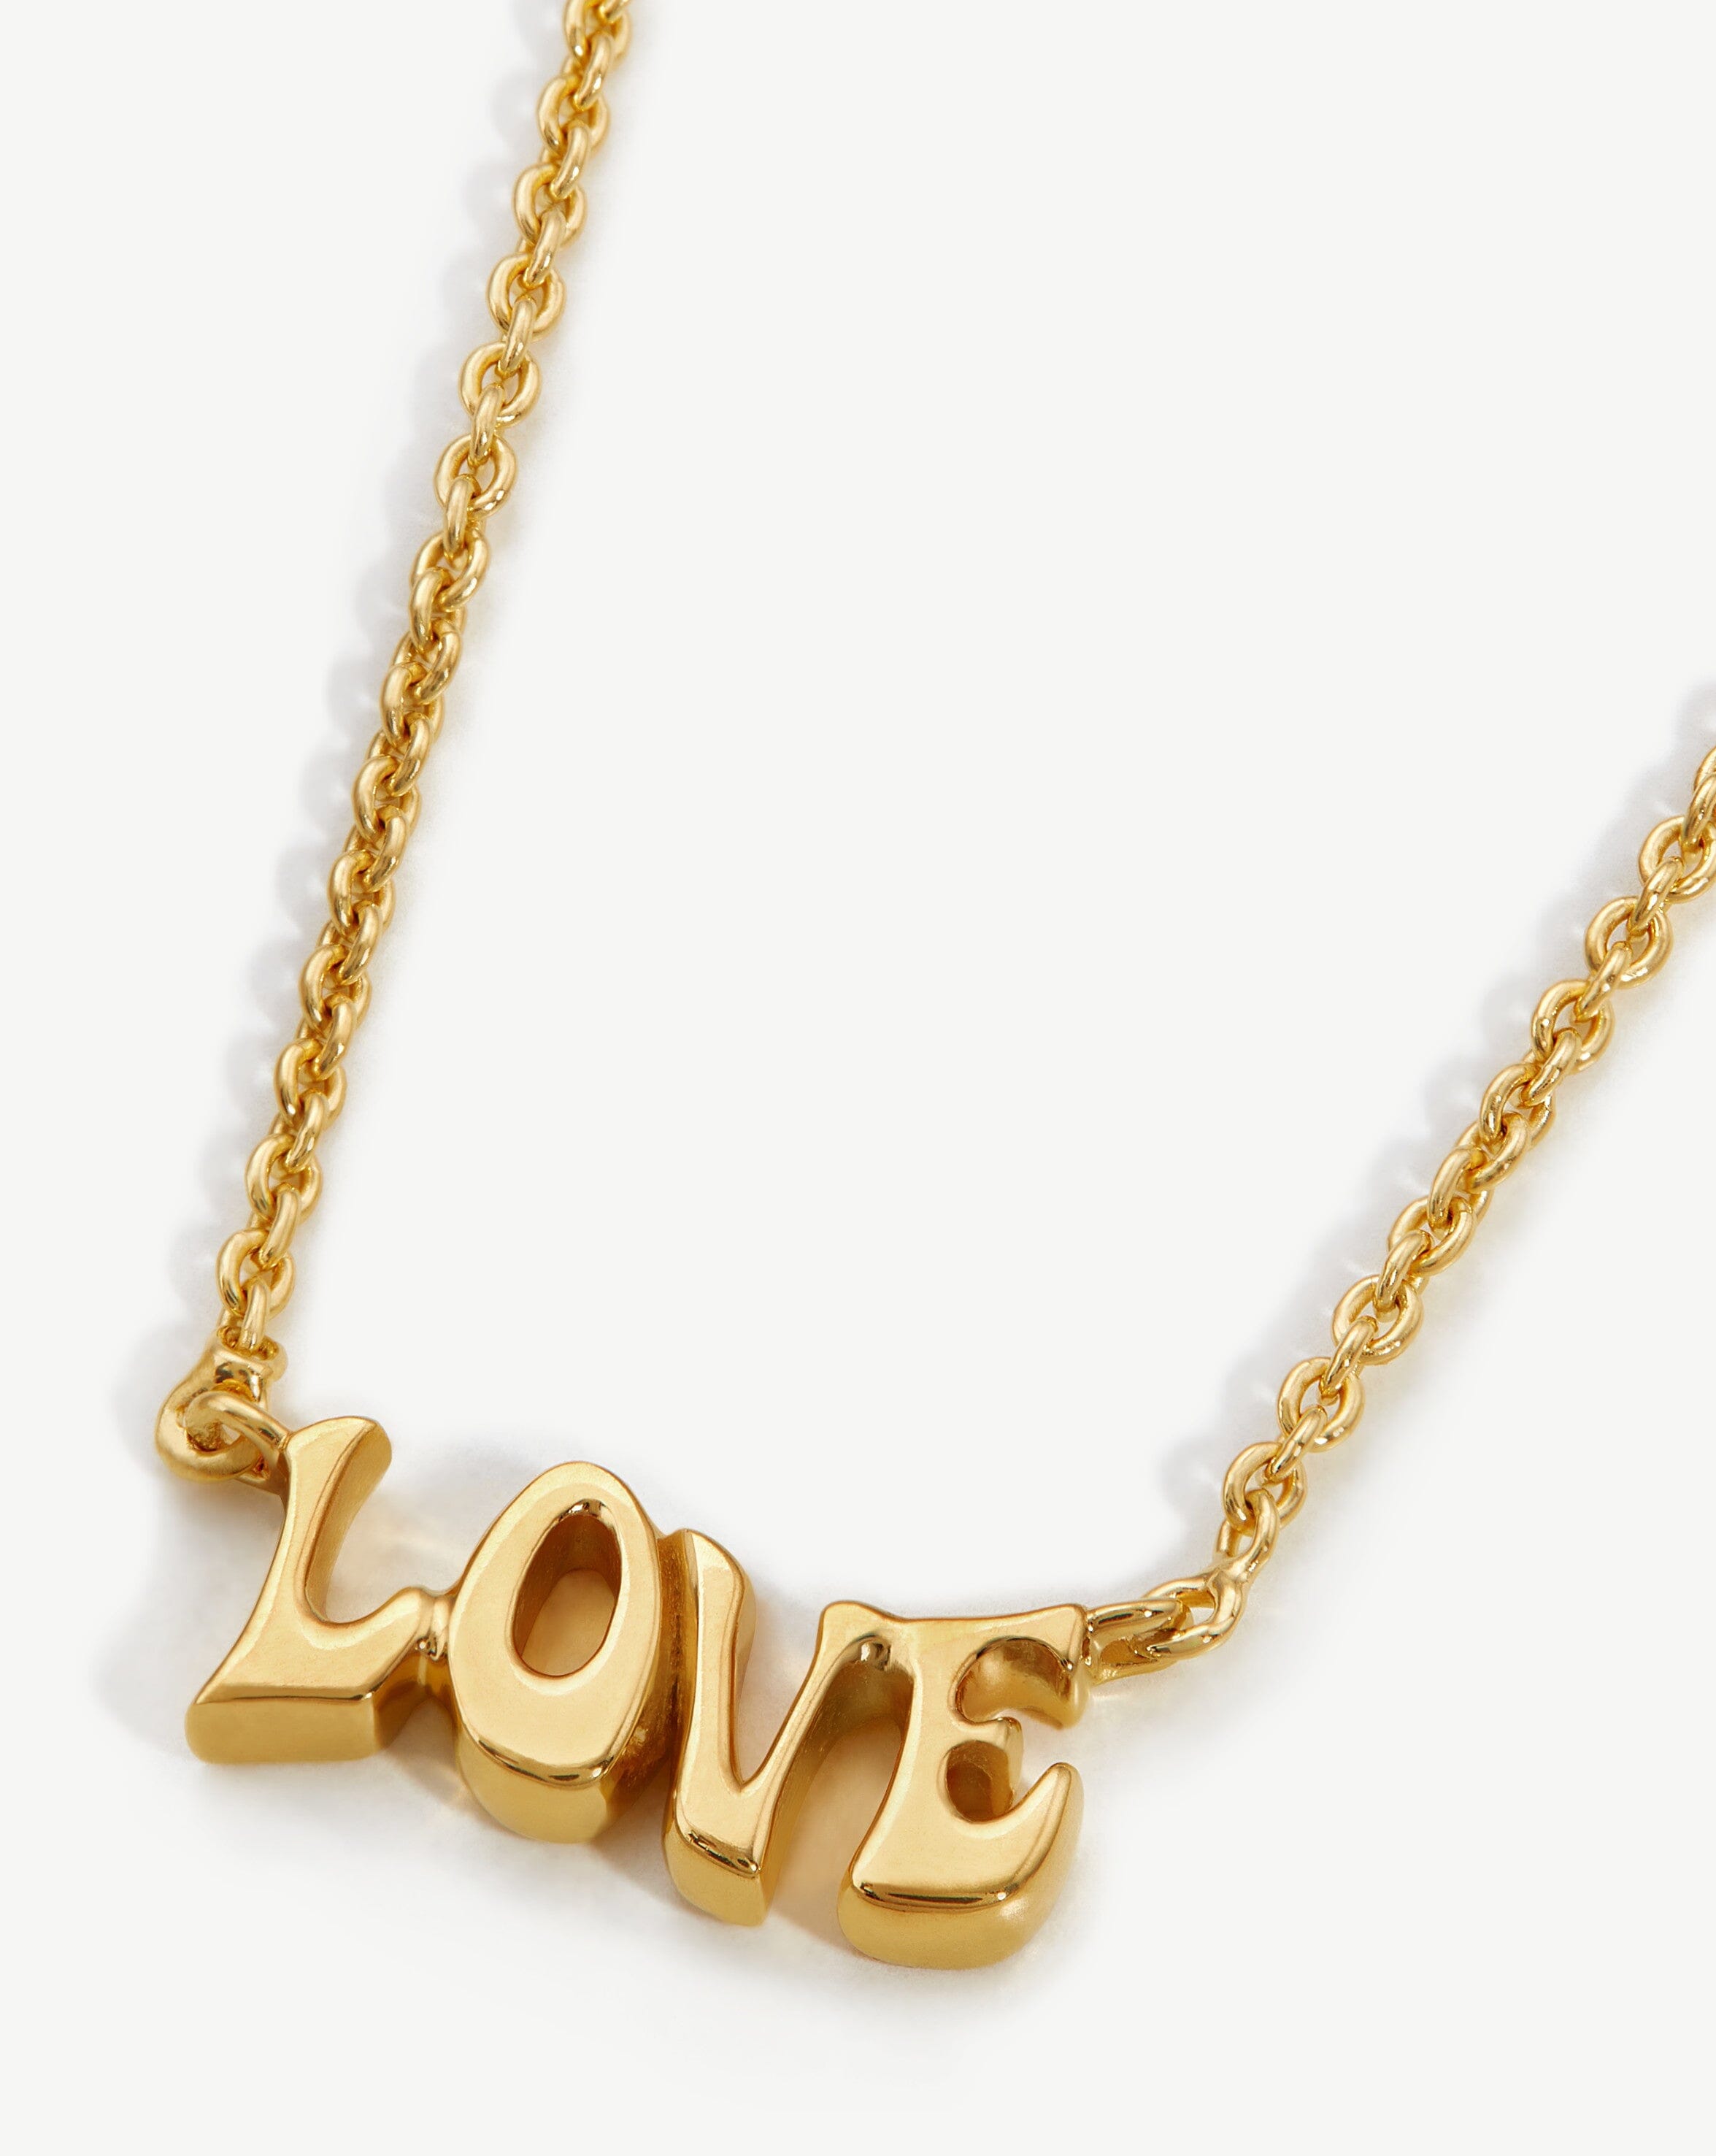 Share the Love Pendant Chain Necklace Necklaces Missoma 